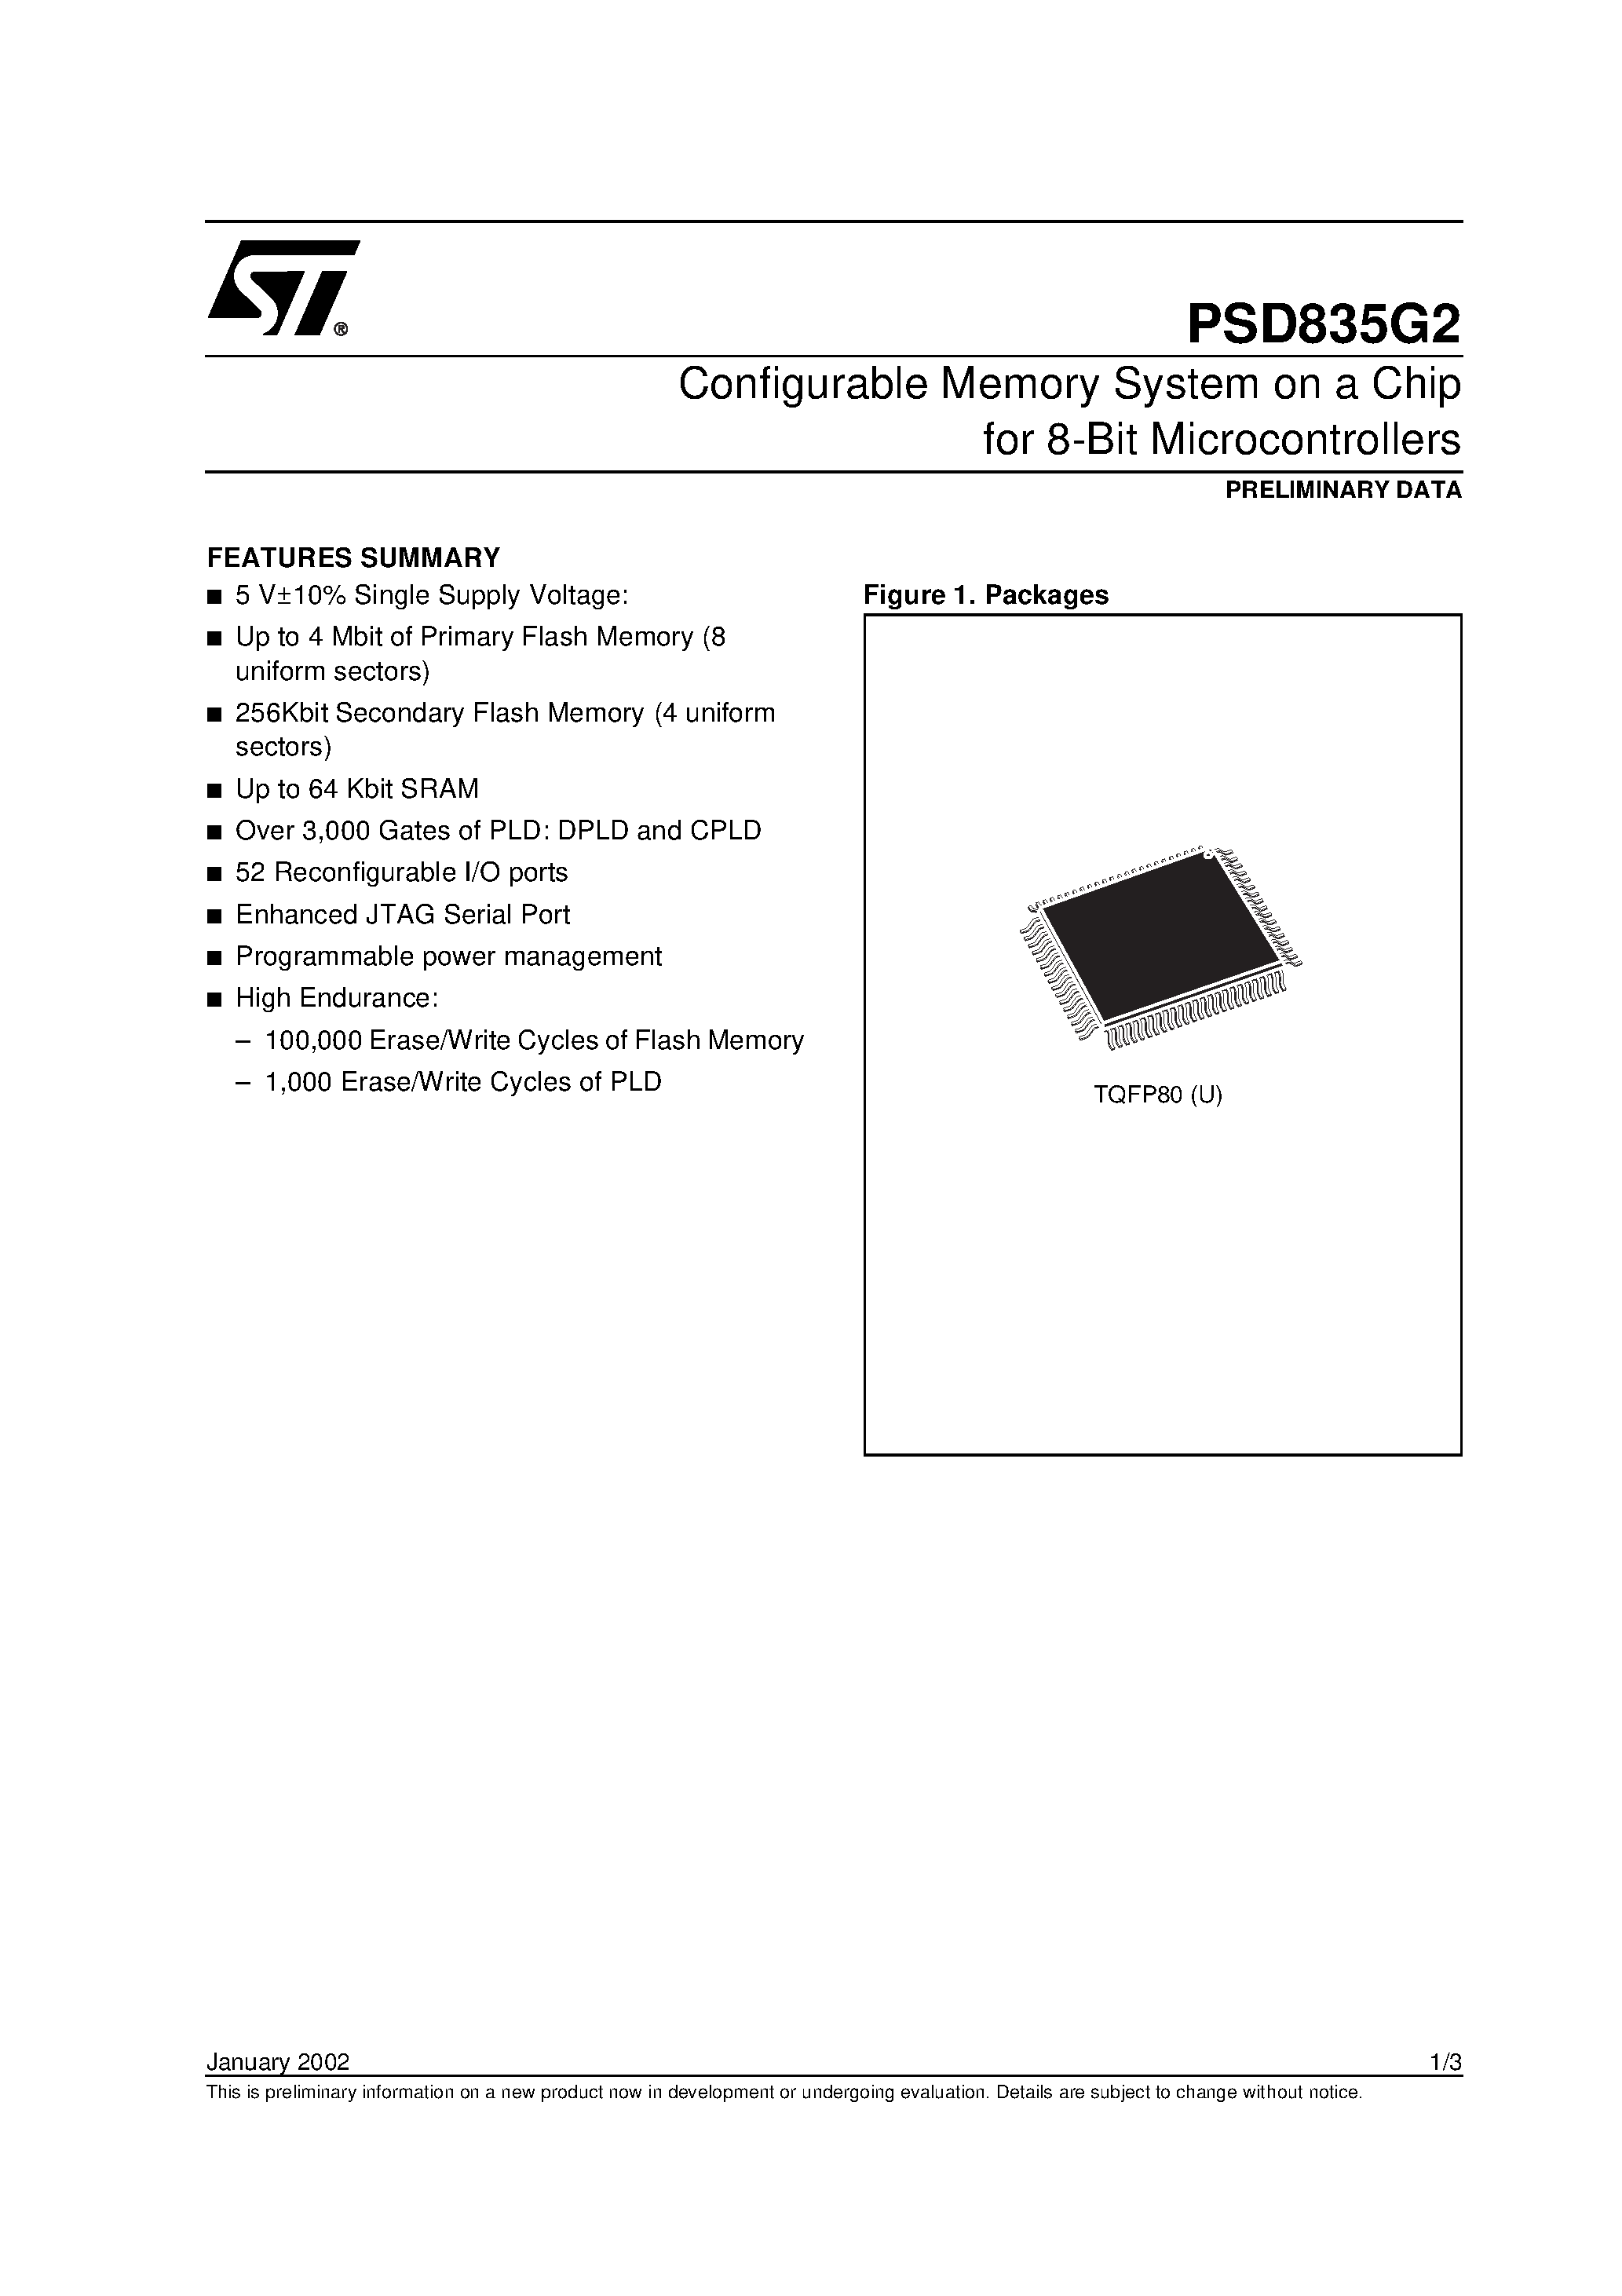 Datasheet PSD835F2-A-70B81I - Configurable Memory System on a Chip for 8-Bit Microcontrollers page 1